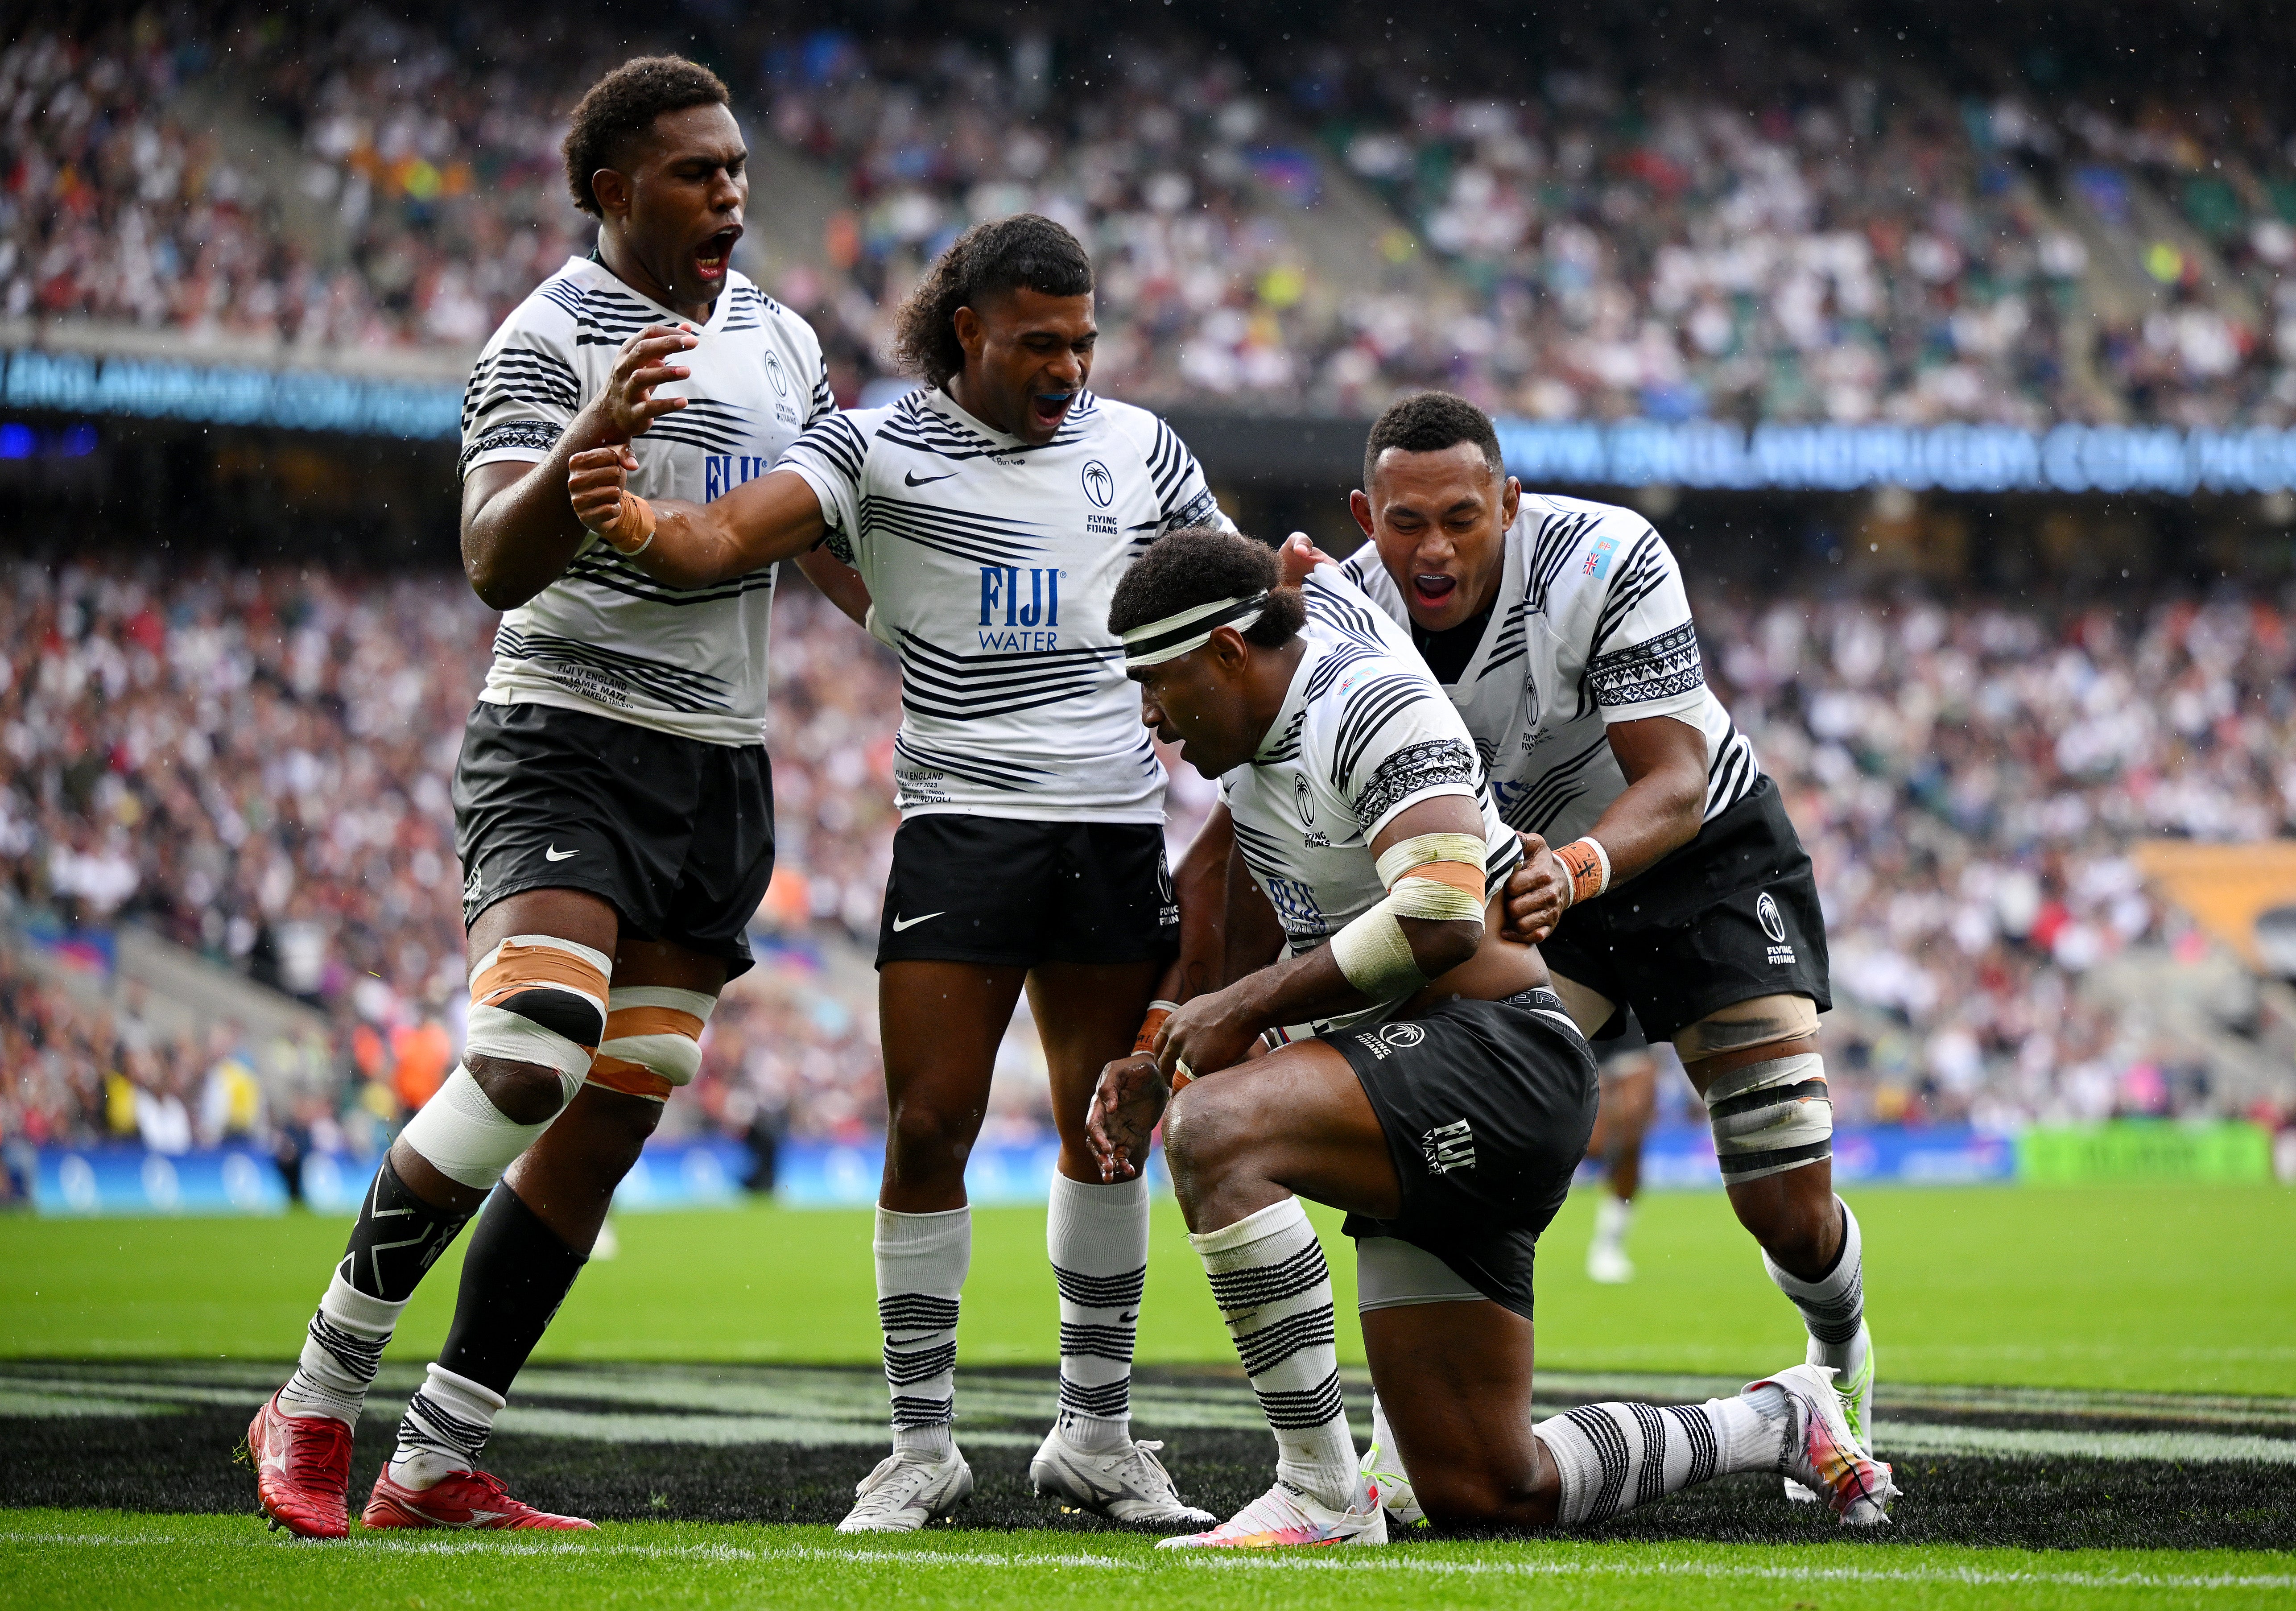 England slump to defeat against Fiji as dismal Rugby World Cup build-up continues The Independent